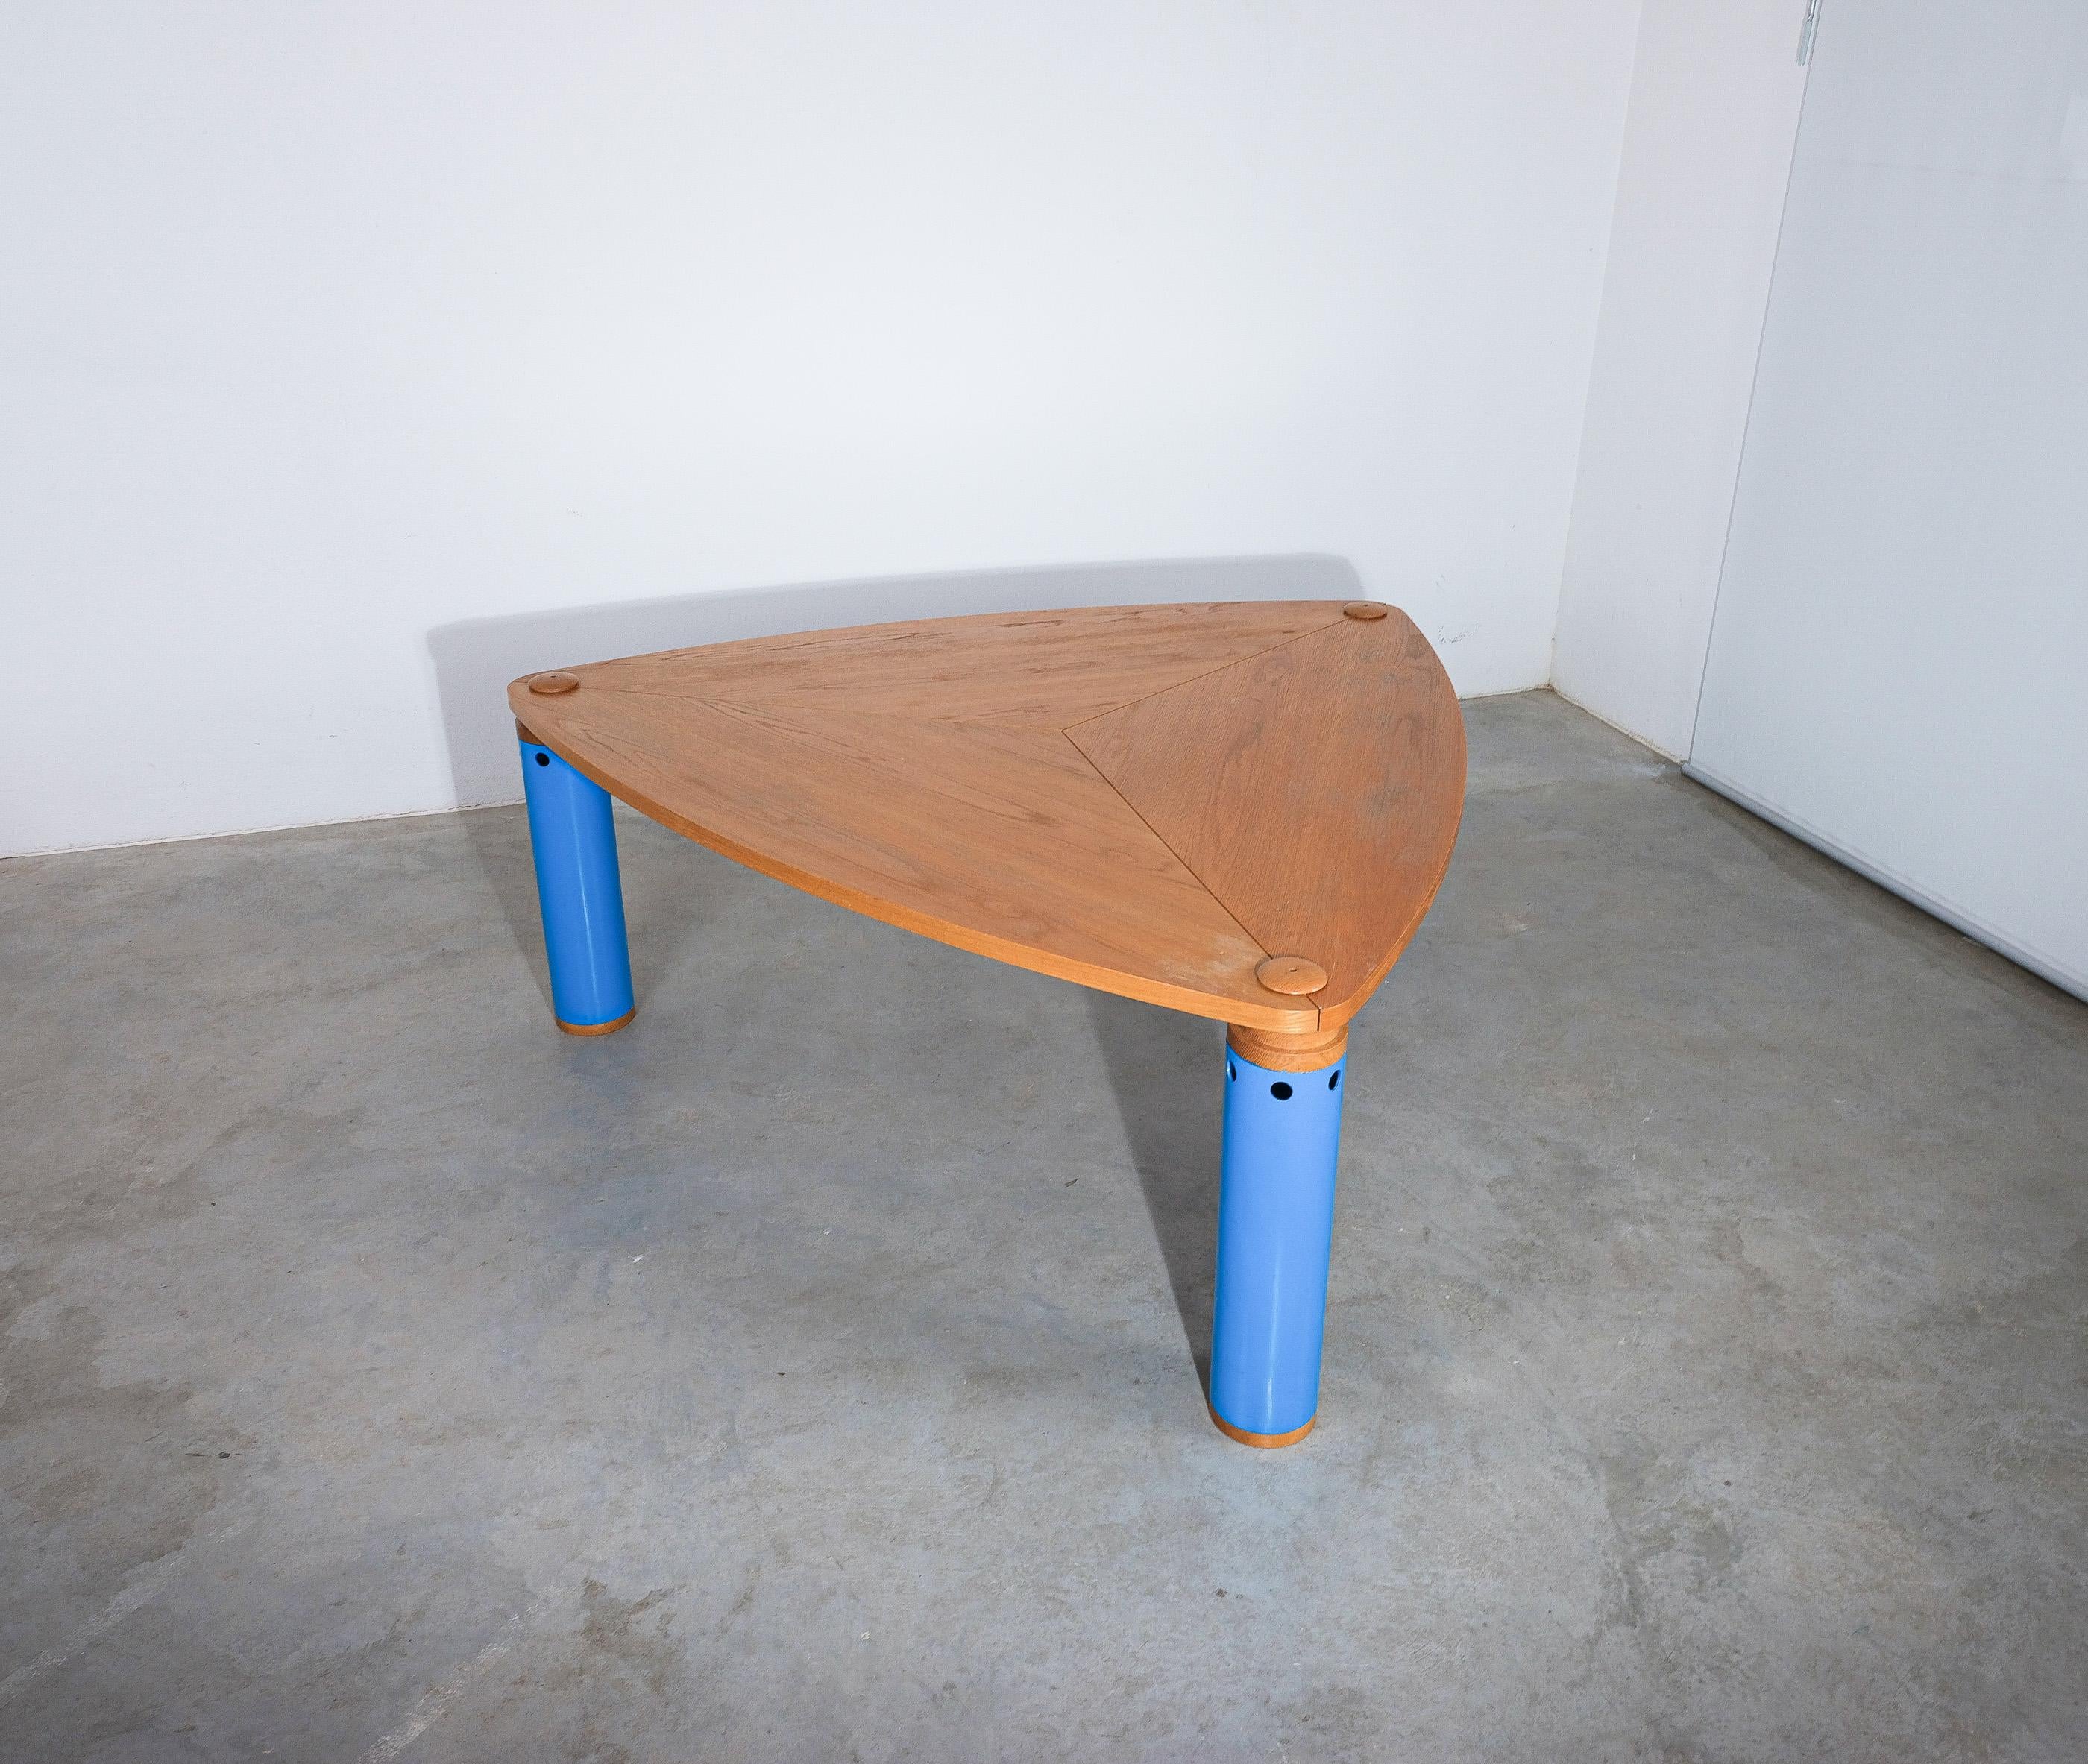 Renato Mandurini Very Large Dining Table Post-Modern, 1980 For Sale 3